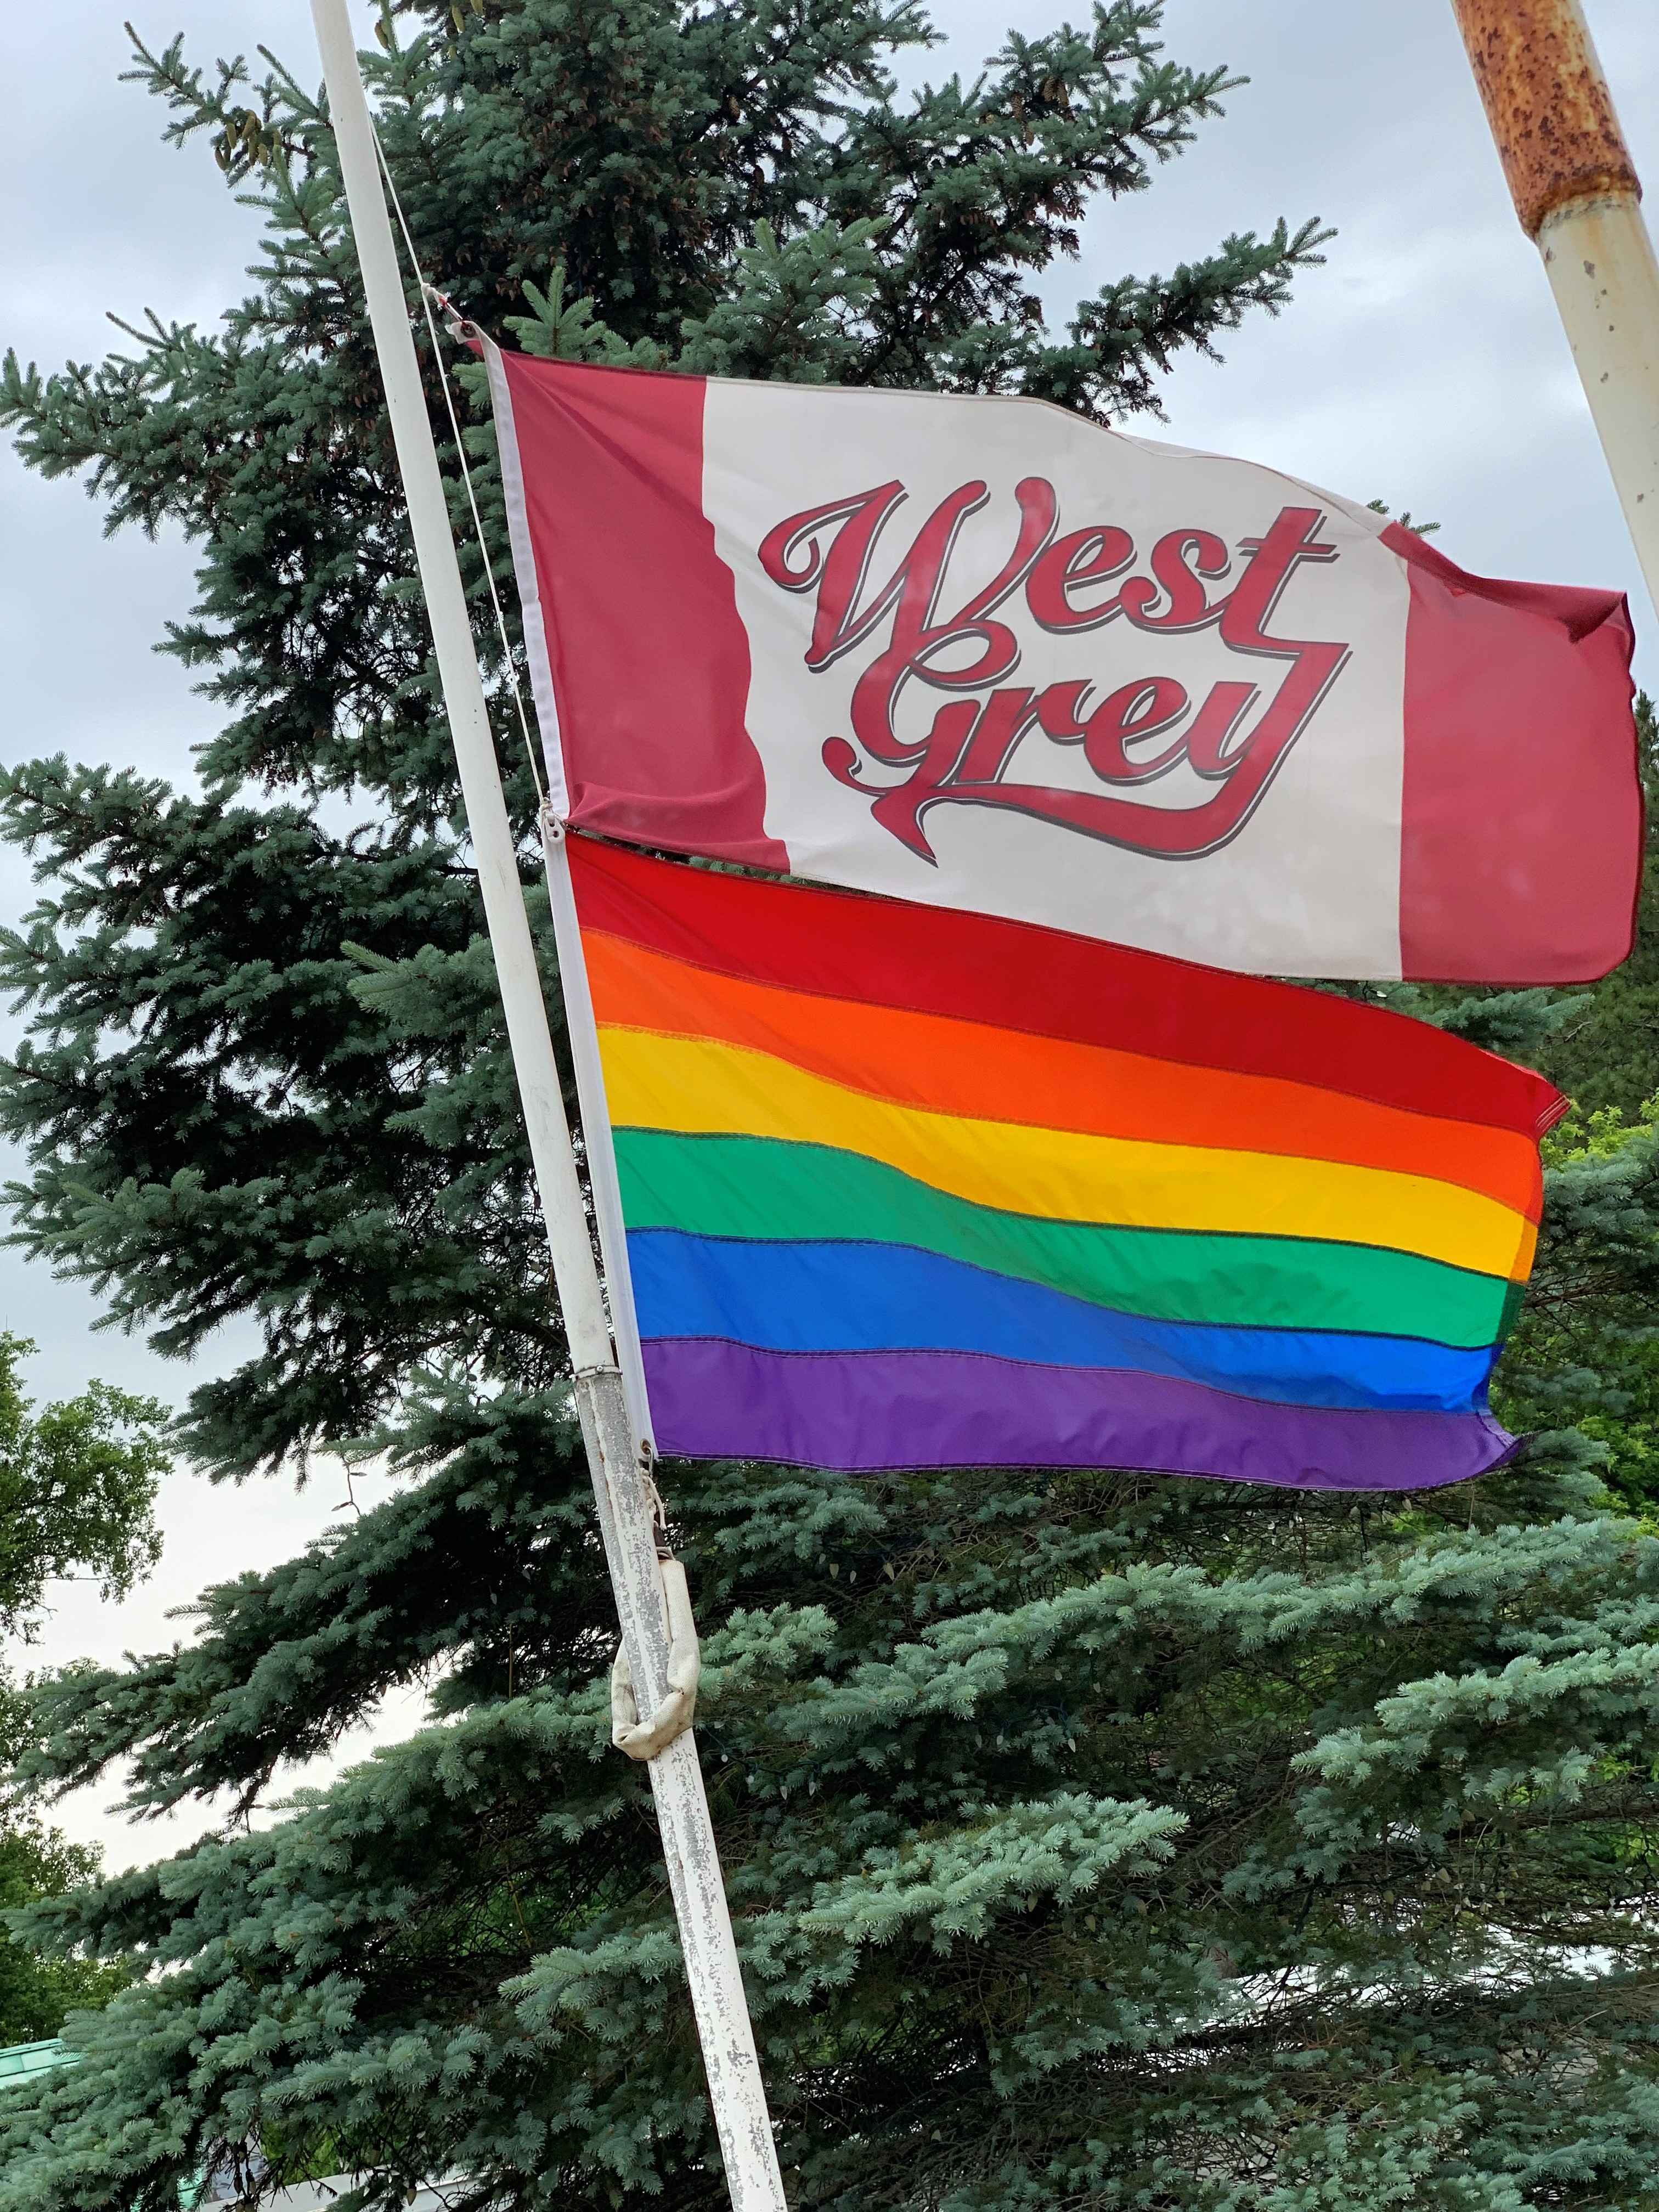 West Grey flags lowered to half-mast